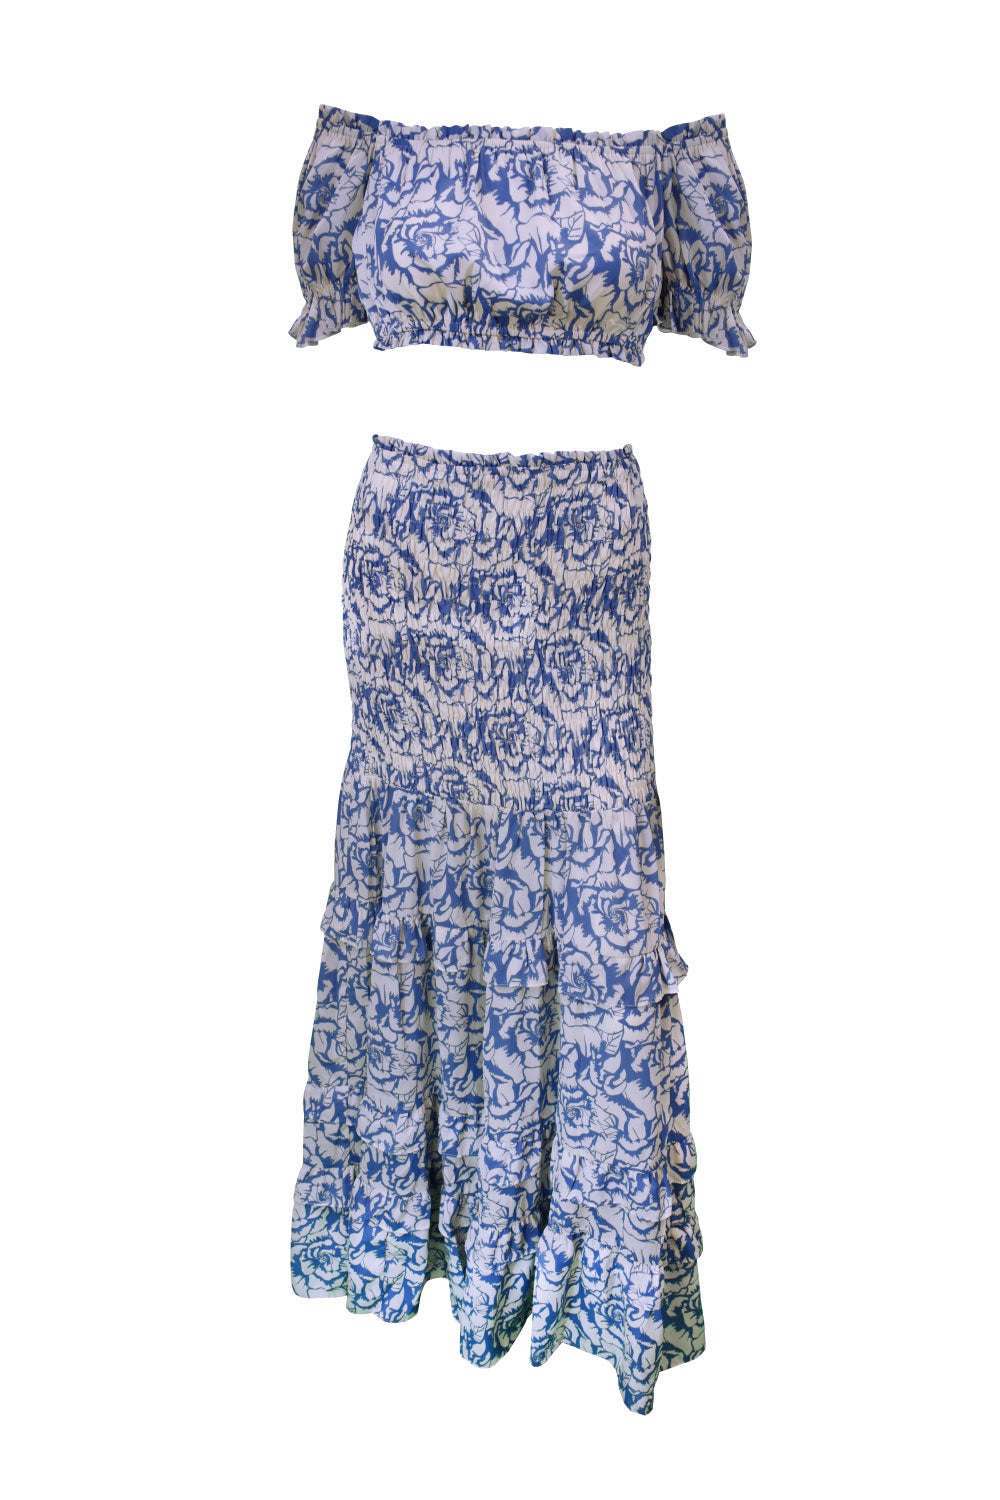 Image of the front of Alfredo Barraza's Blue Roses Two Piece Skirt Set.